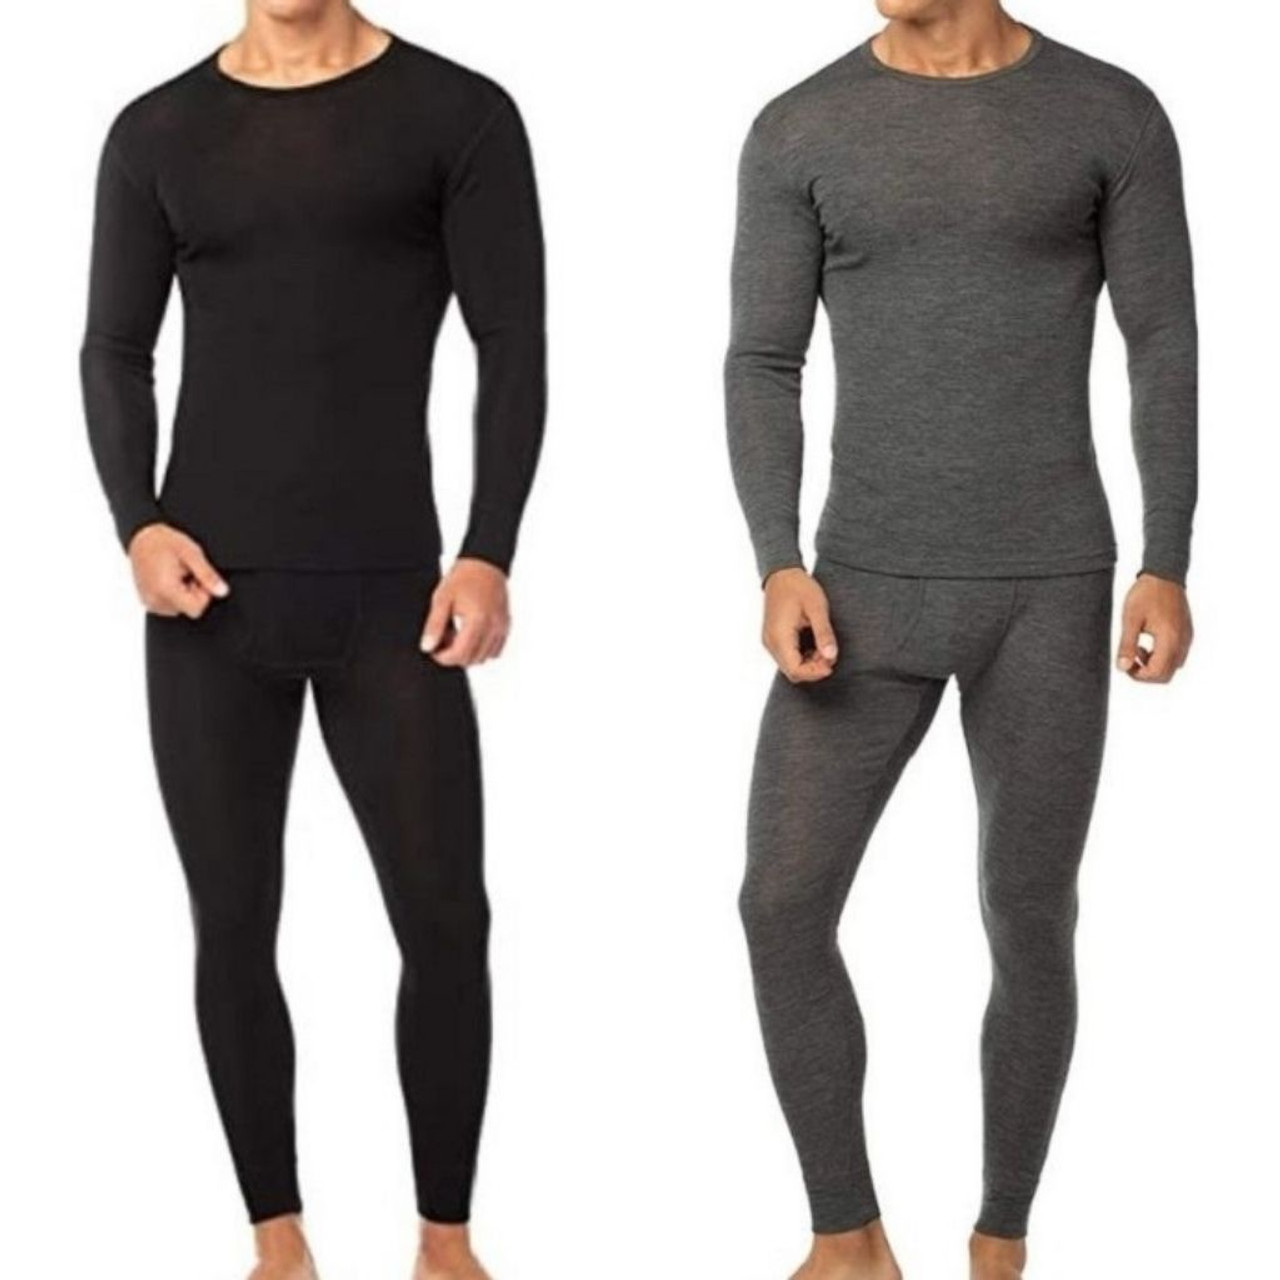 Men’s Cotton Fleece Thermal Top and Pants Set (2-Pairs) $29.99 63% OFF